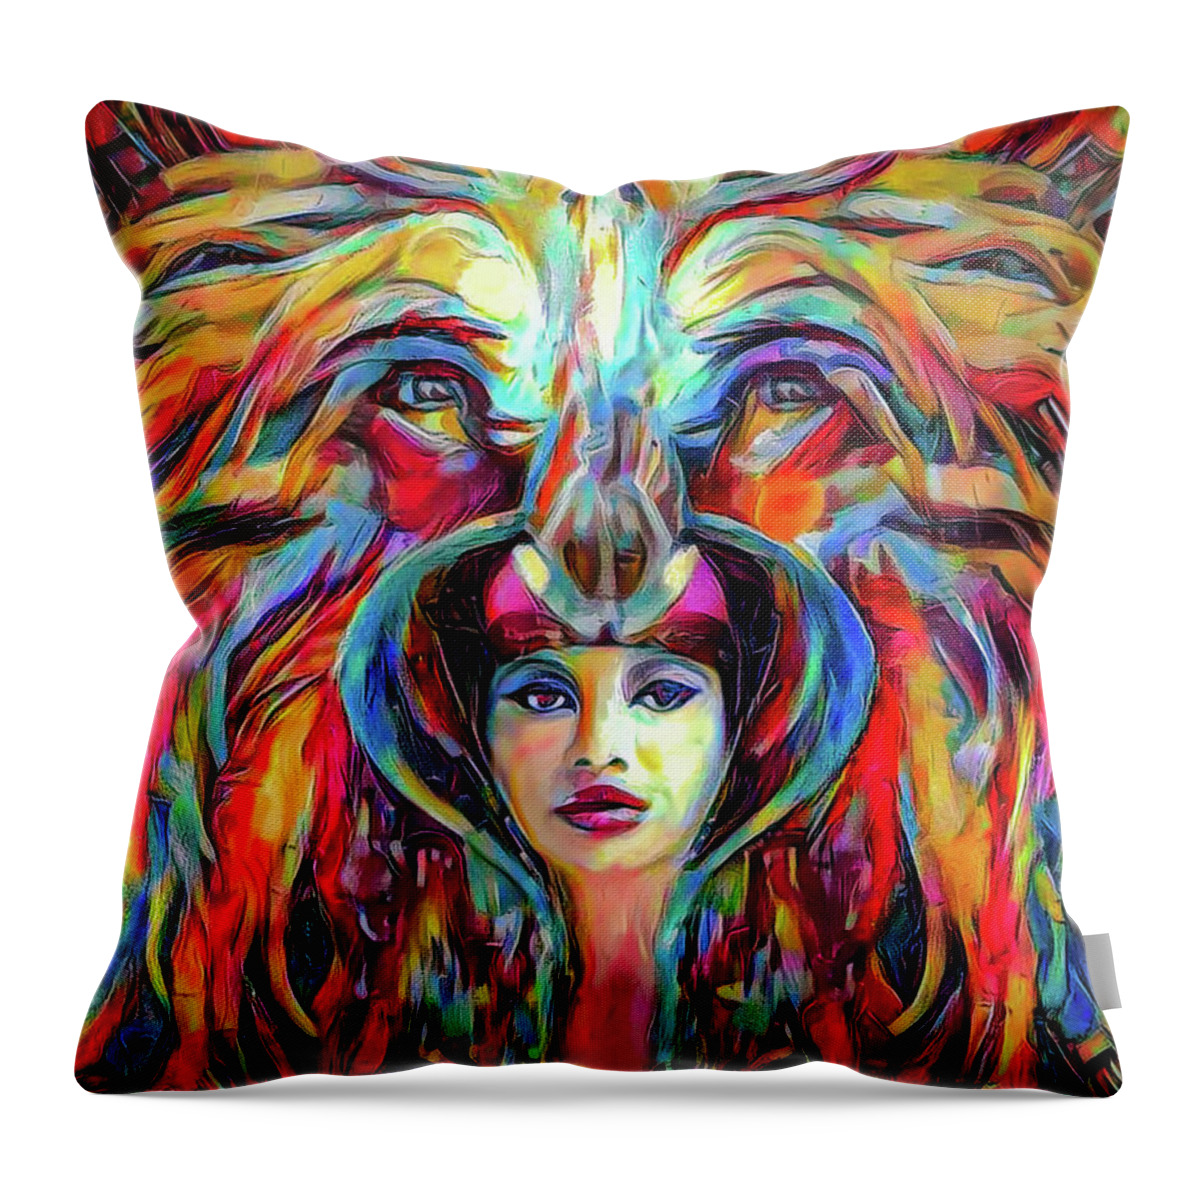 Wild Costume Throw Pillow featuring the mixed media Wild costume by Lilia D